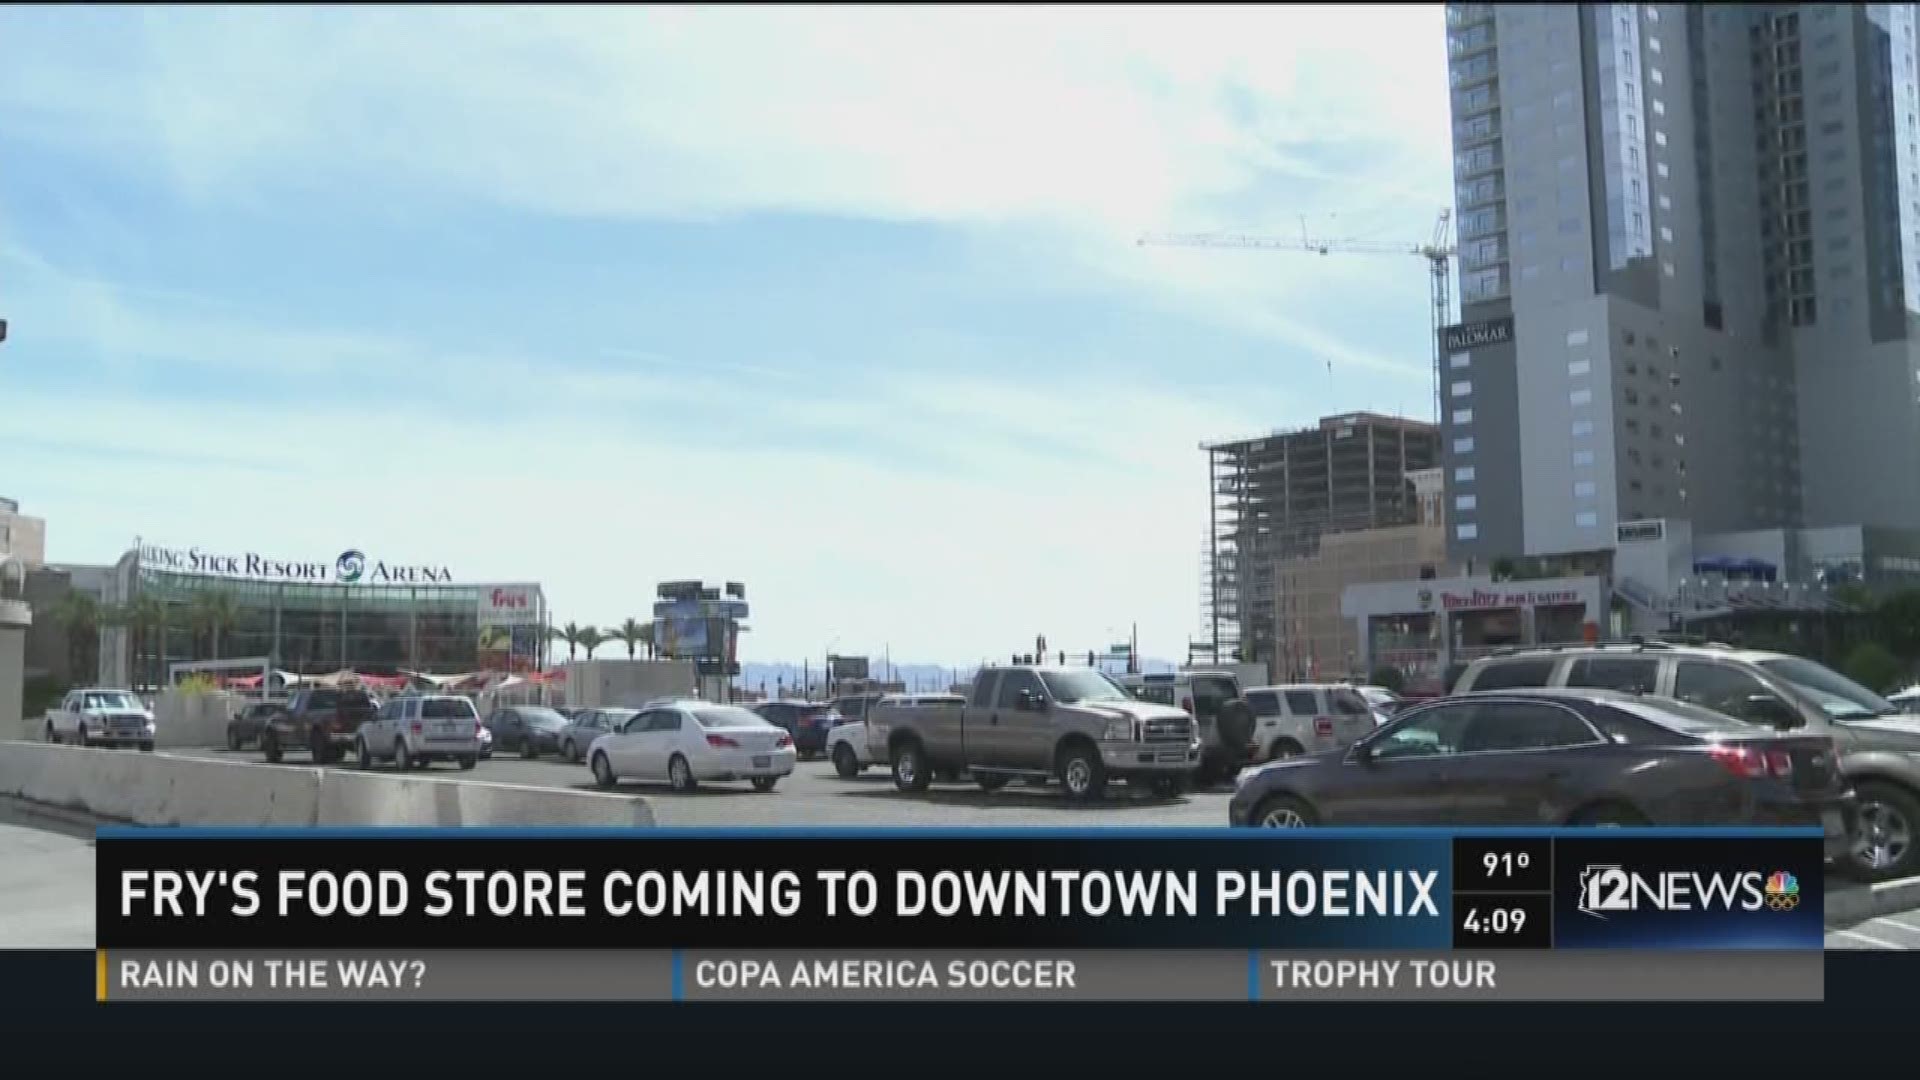 Fry's is opening a new grocery store in Downtown Phoenix